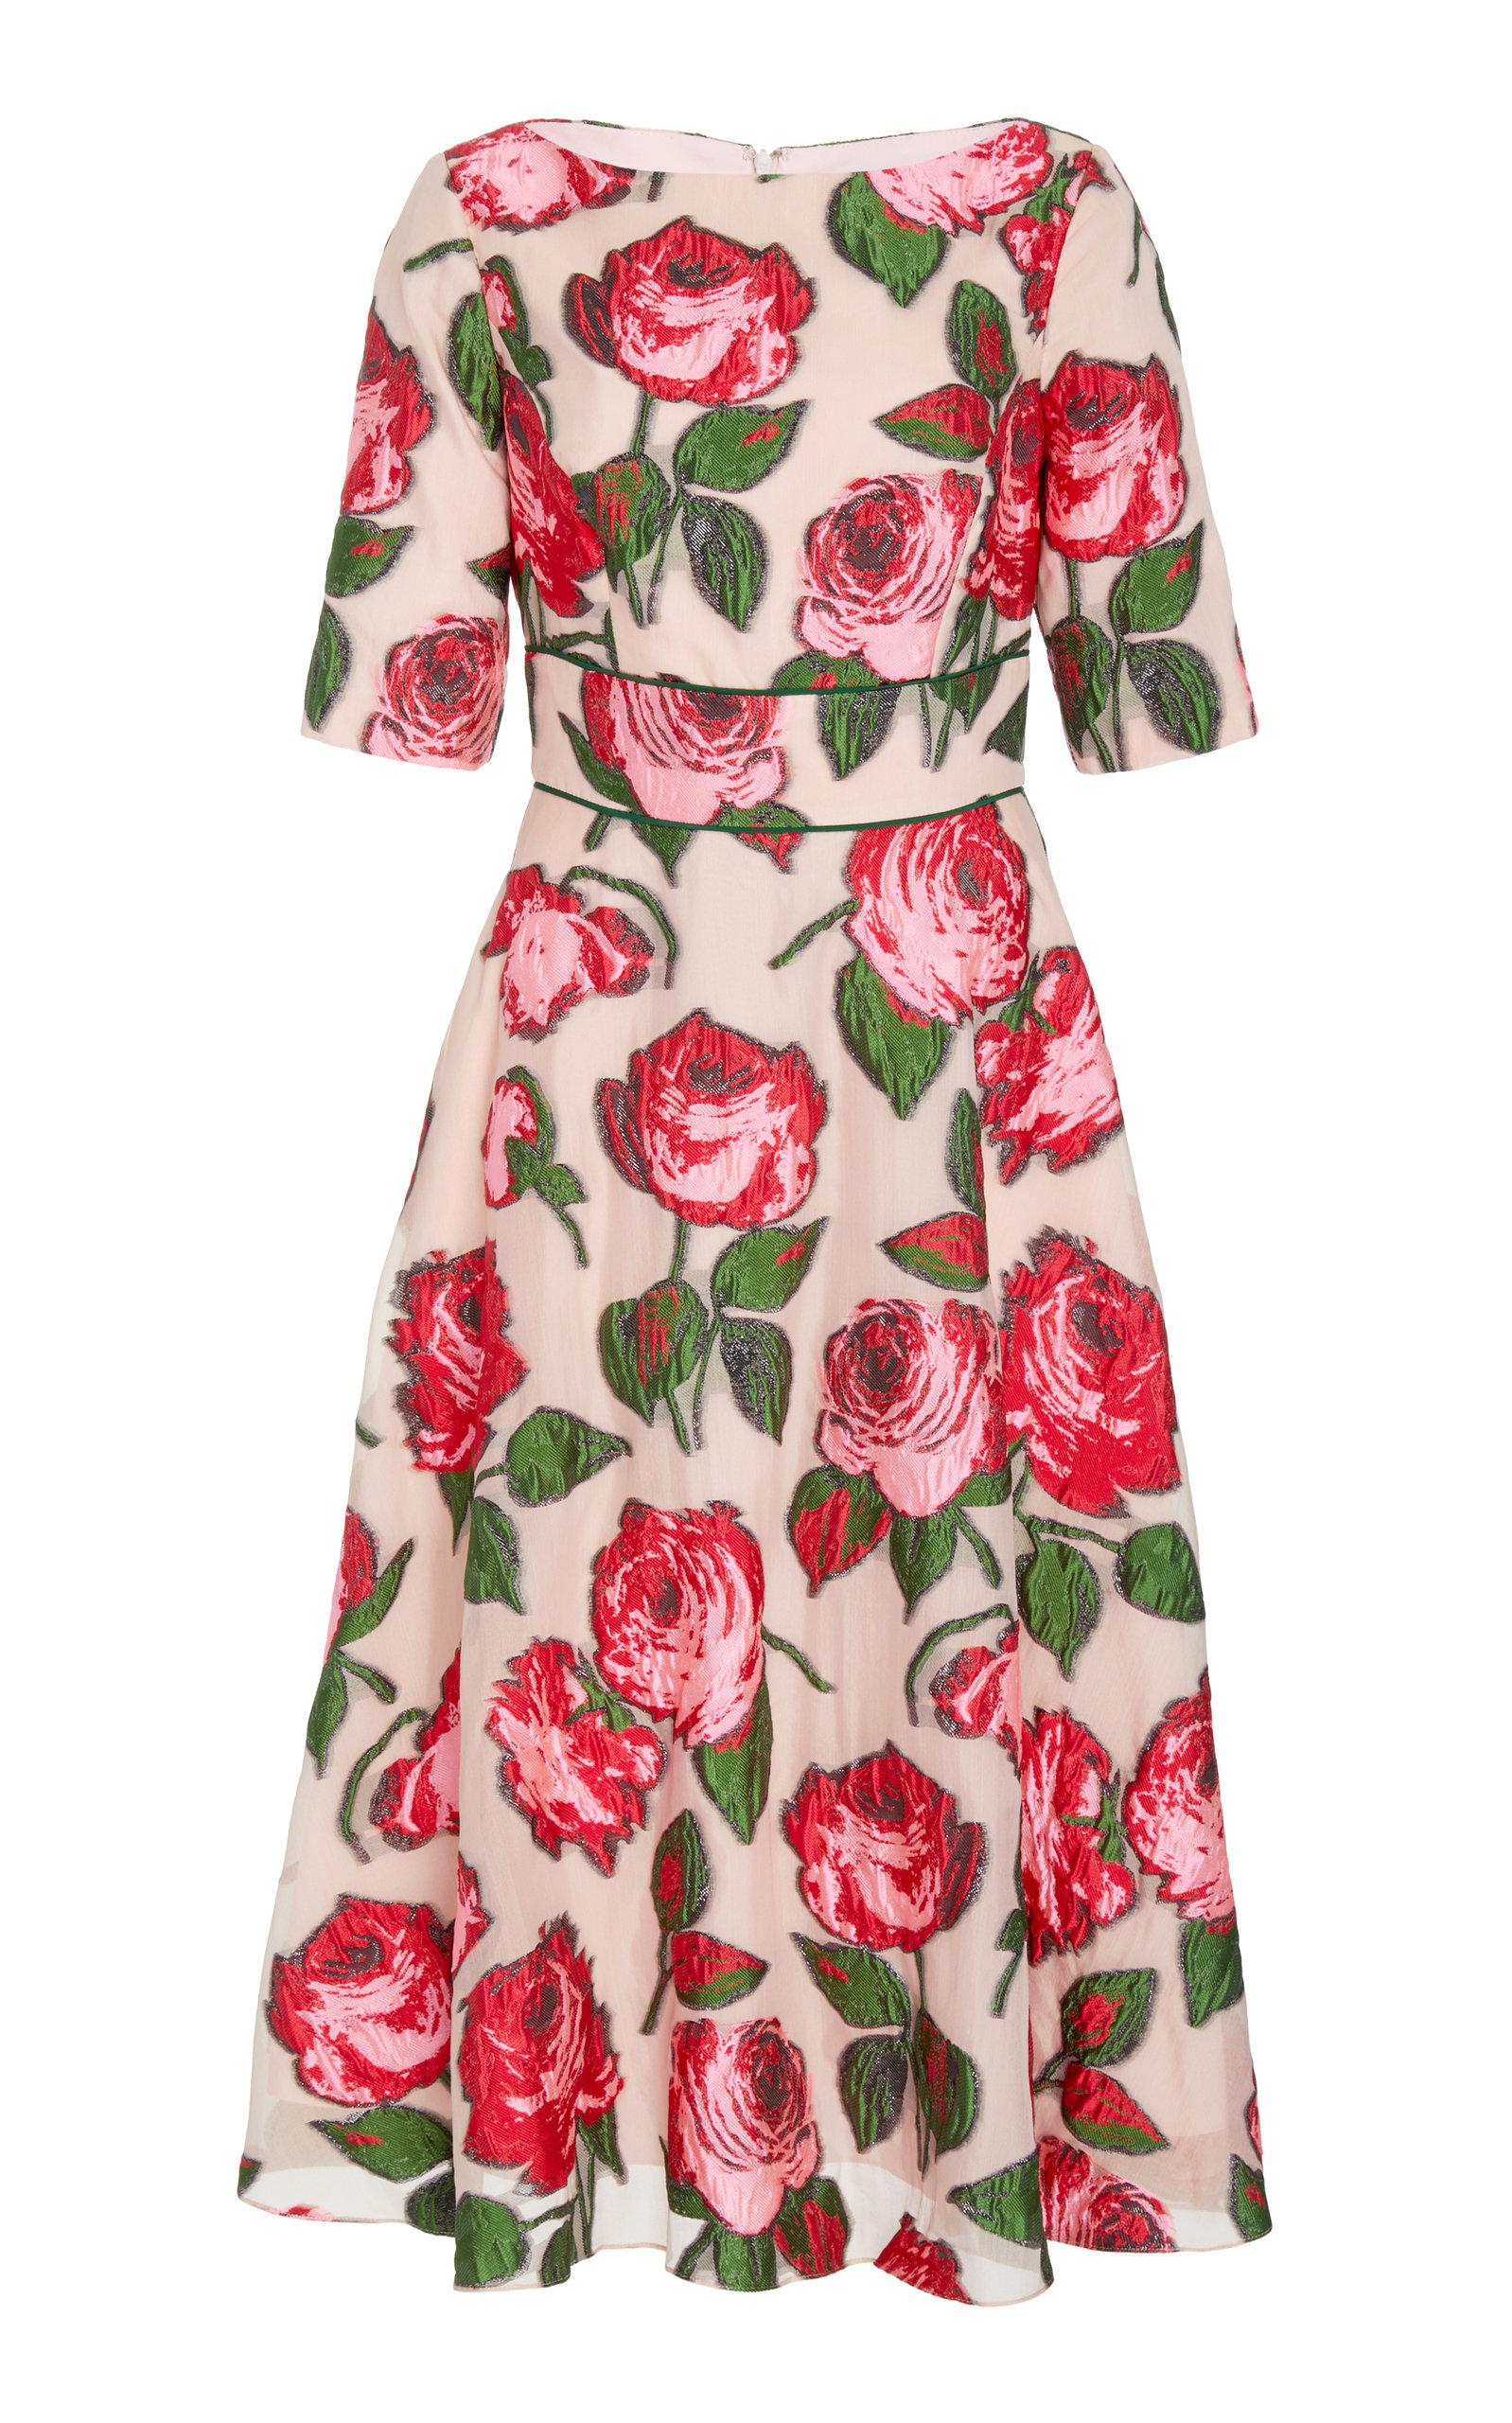 Lela Rose Synthetic Embroidered Floral Fil Coupé Midi Dress in Pink - Lyst